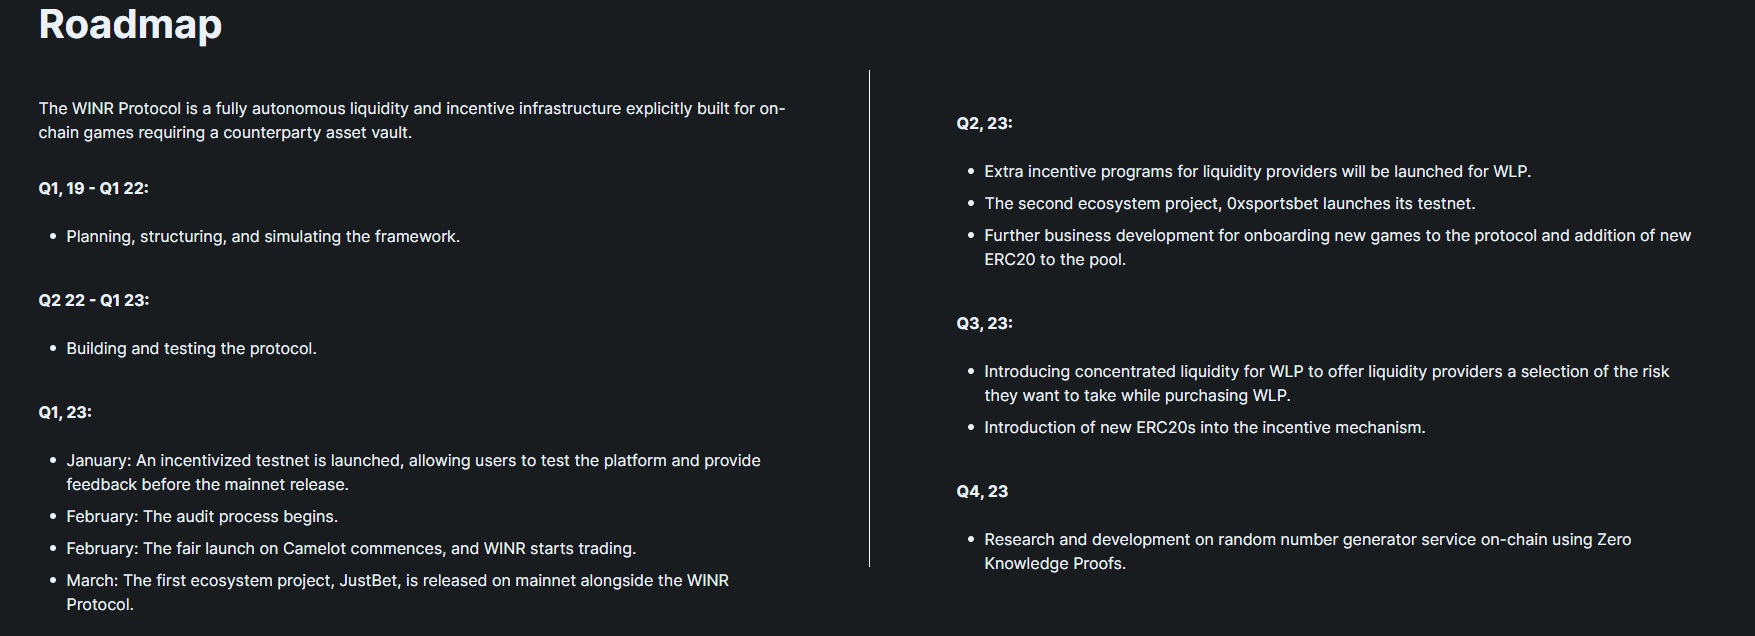 WINR Protocol and WINR Token Roadmap